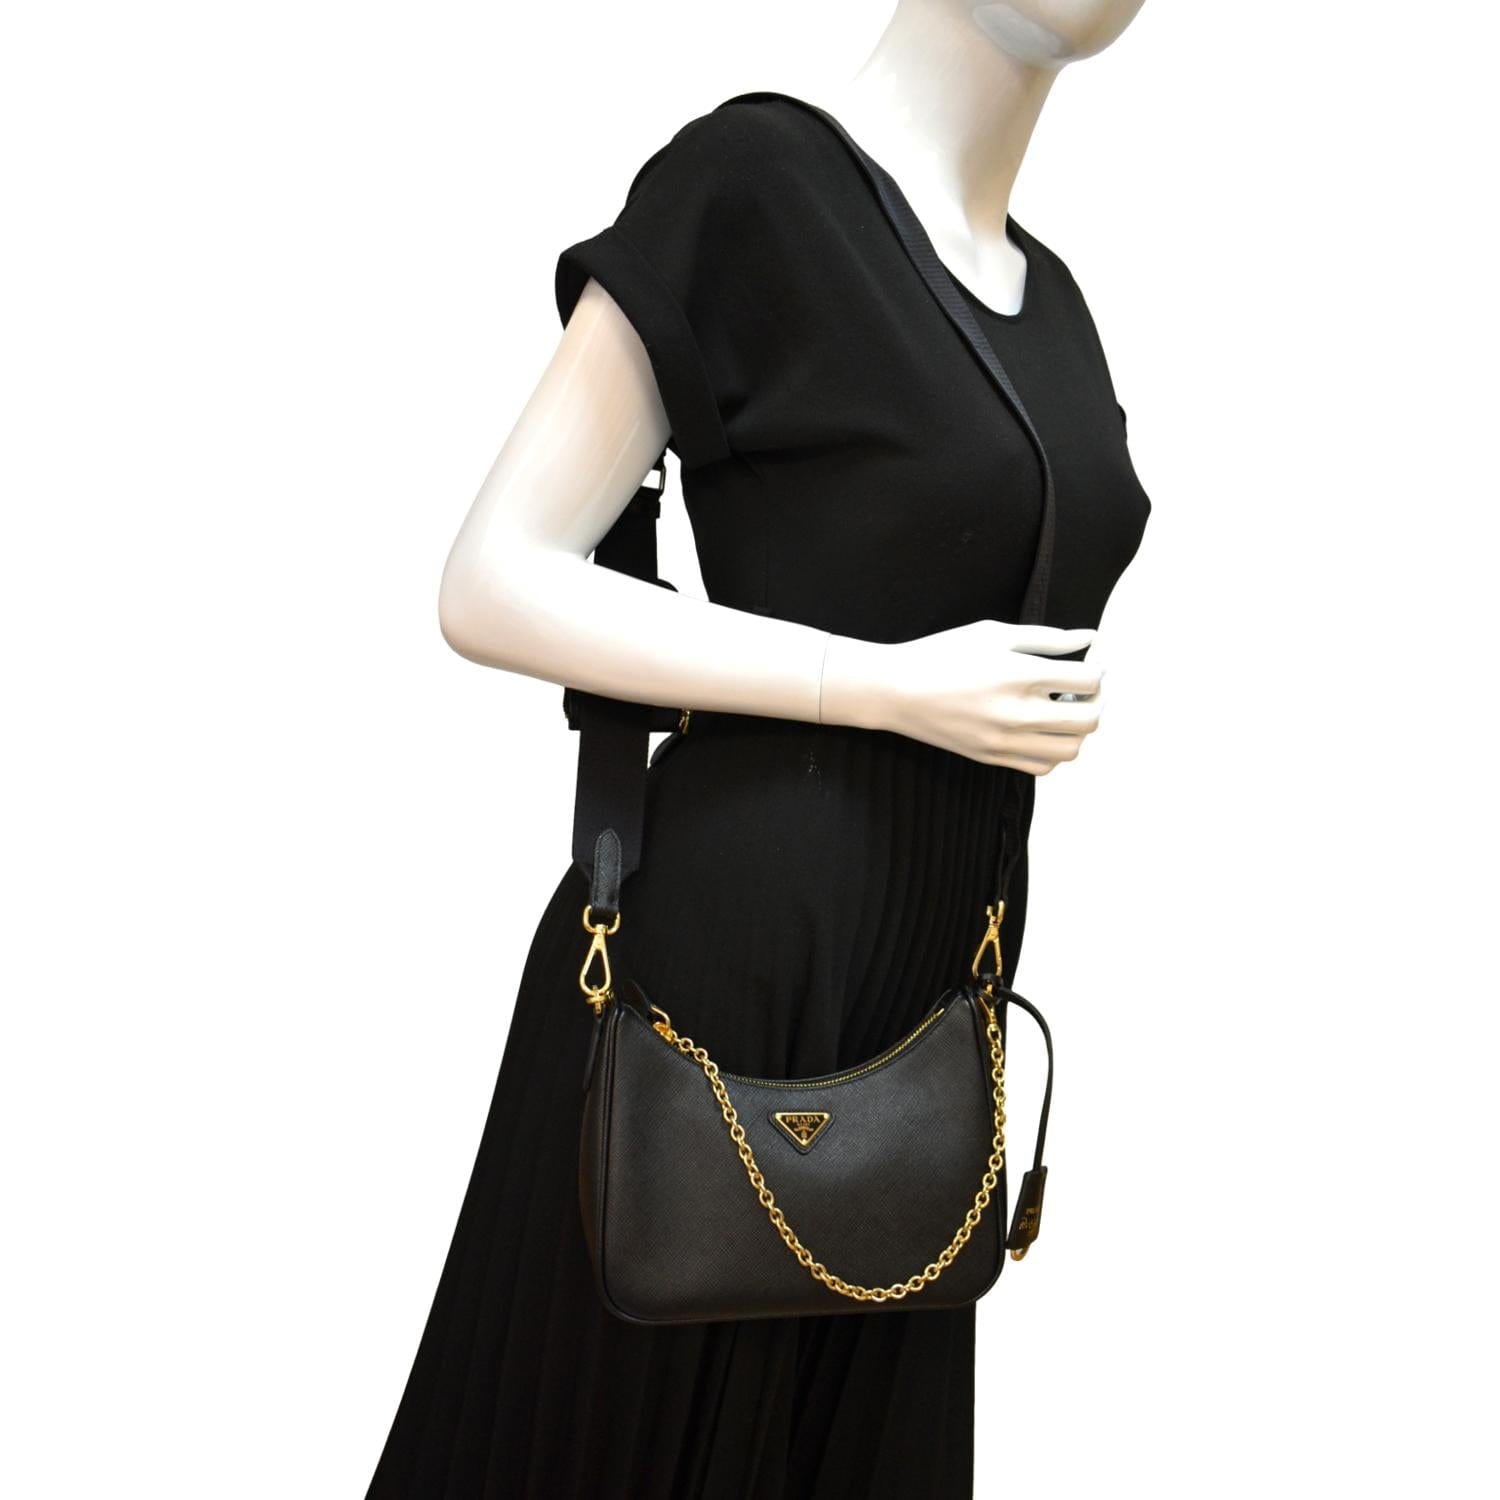 How to Style the PRADA RE EDITION 2005 Saffiano Leather Bag